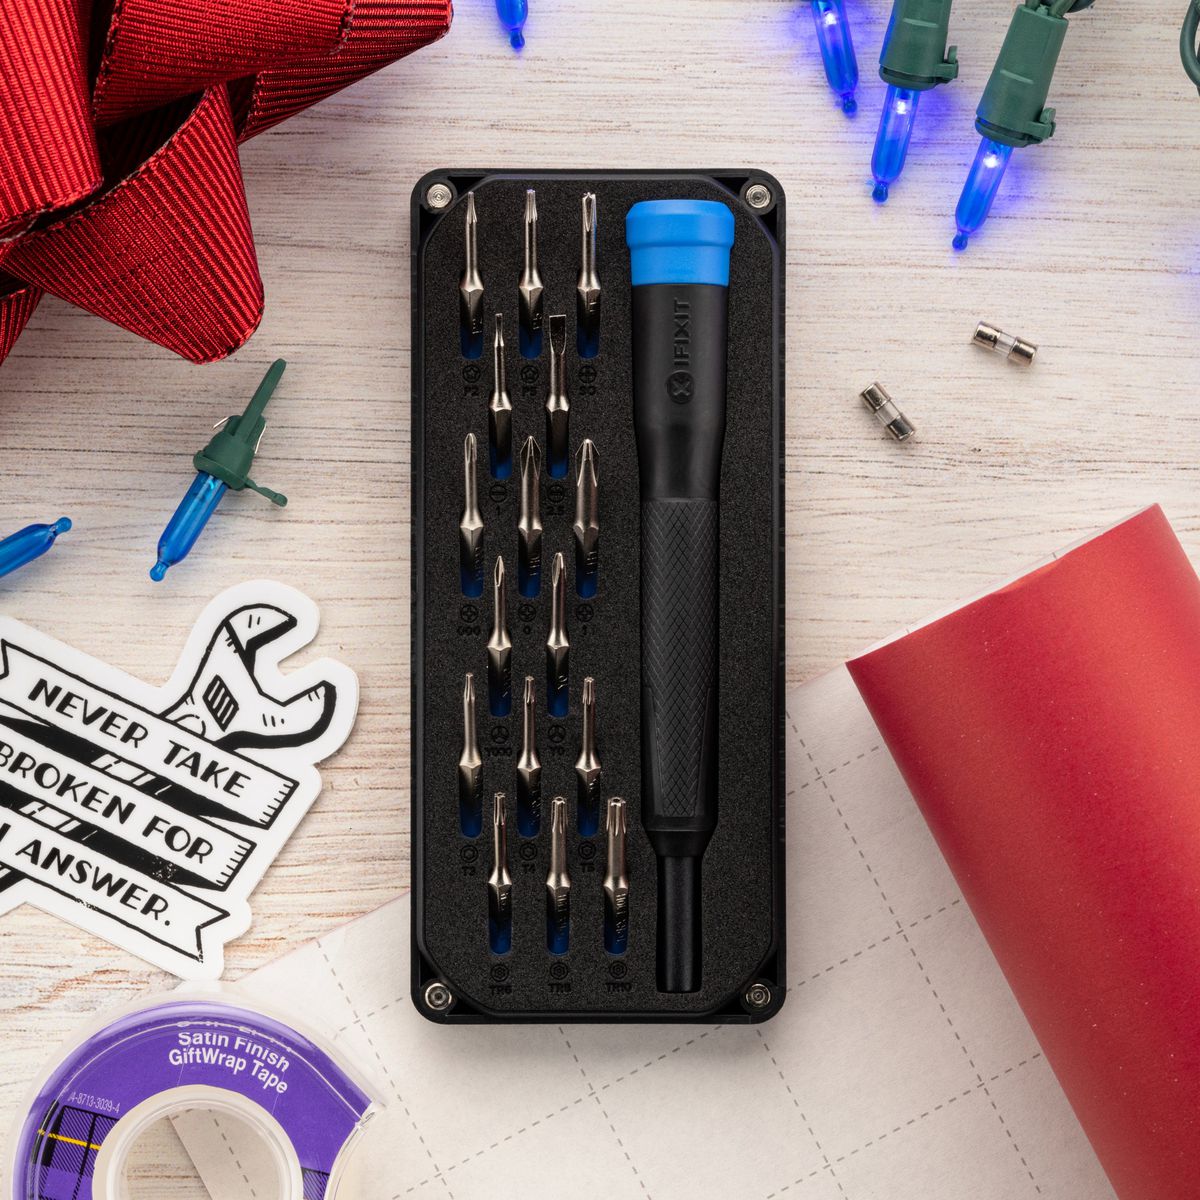 A picture of the iFixit Minnow kit